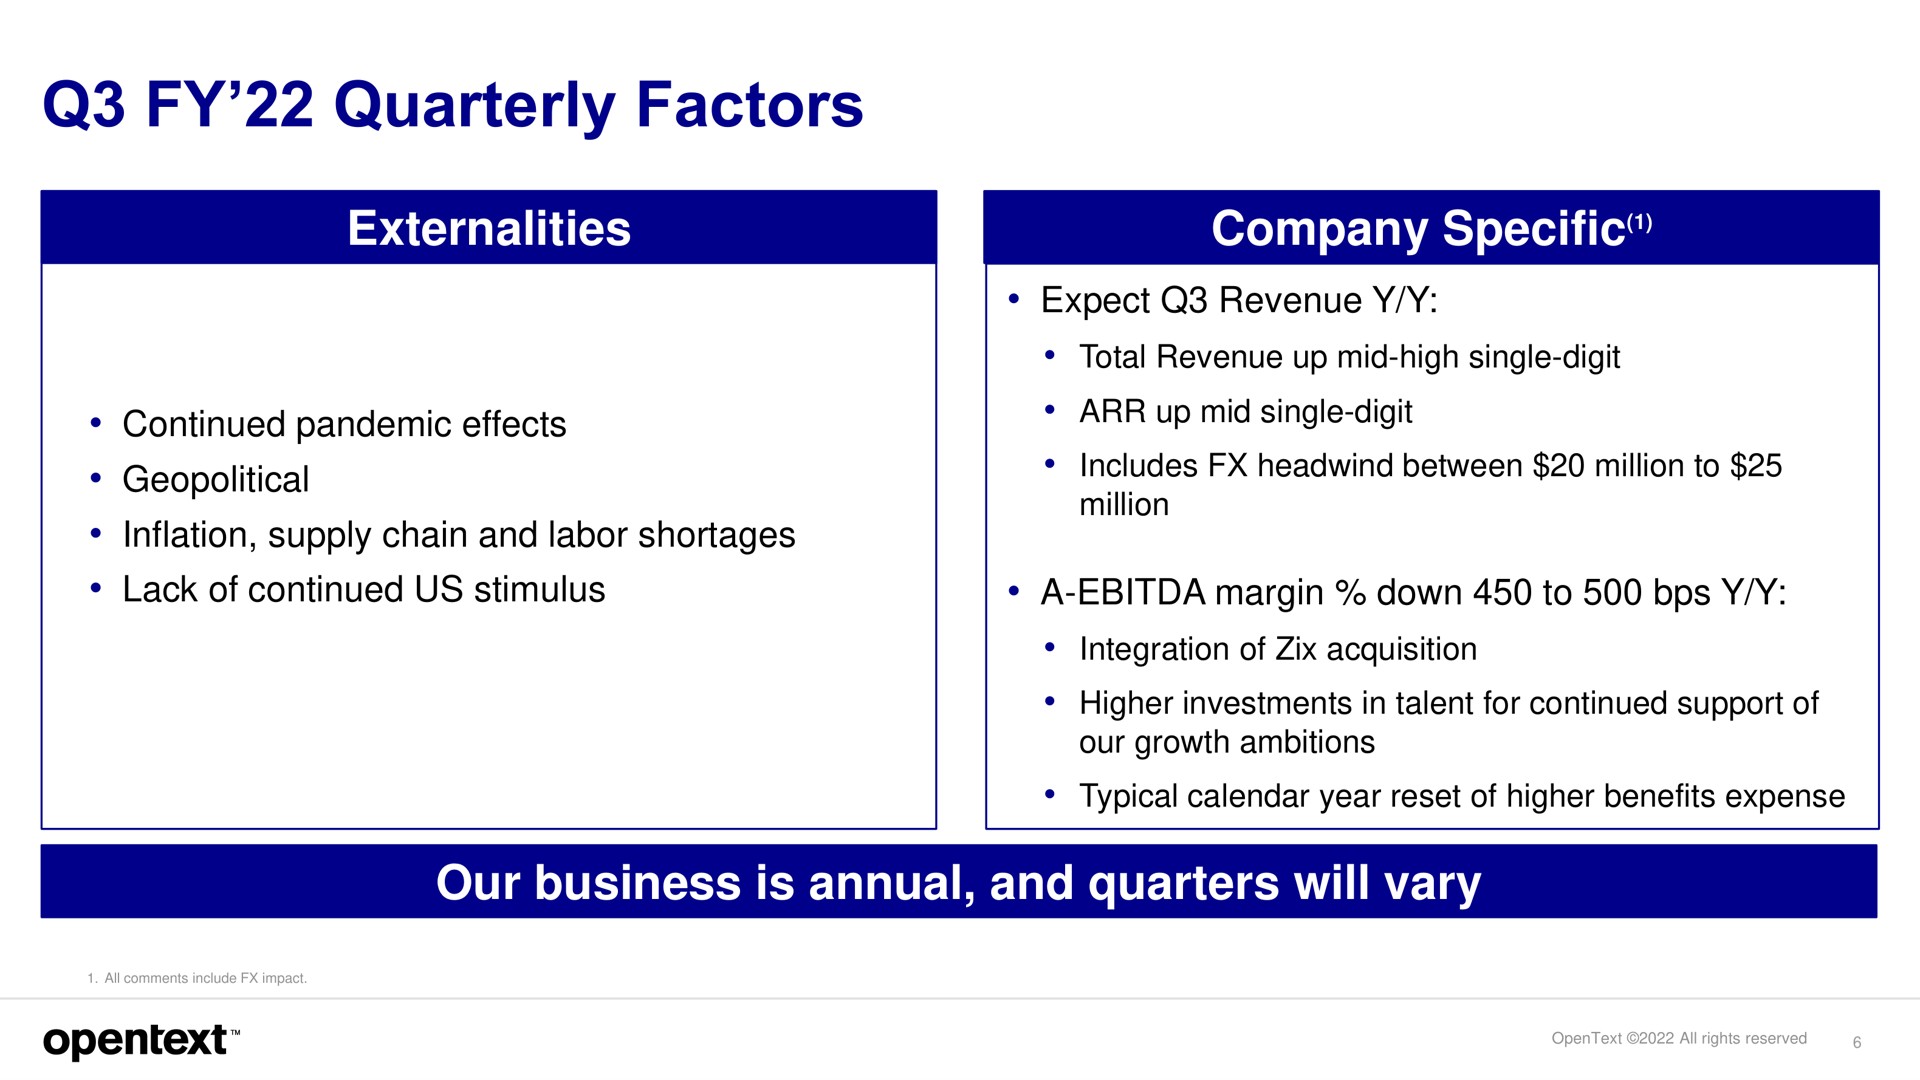 quarterly factors externalities company specific our business is annual and quarters will vary | OpenText